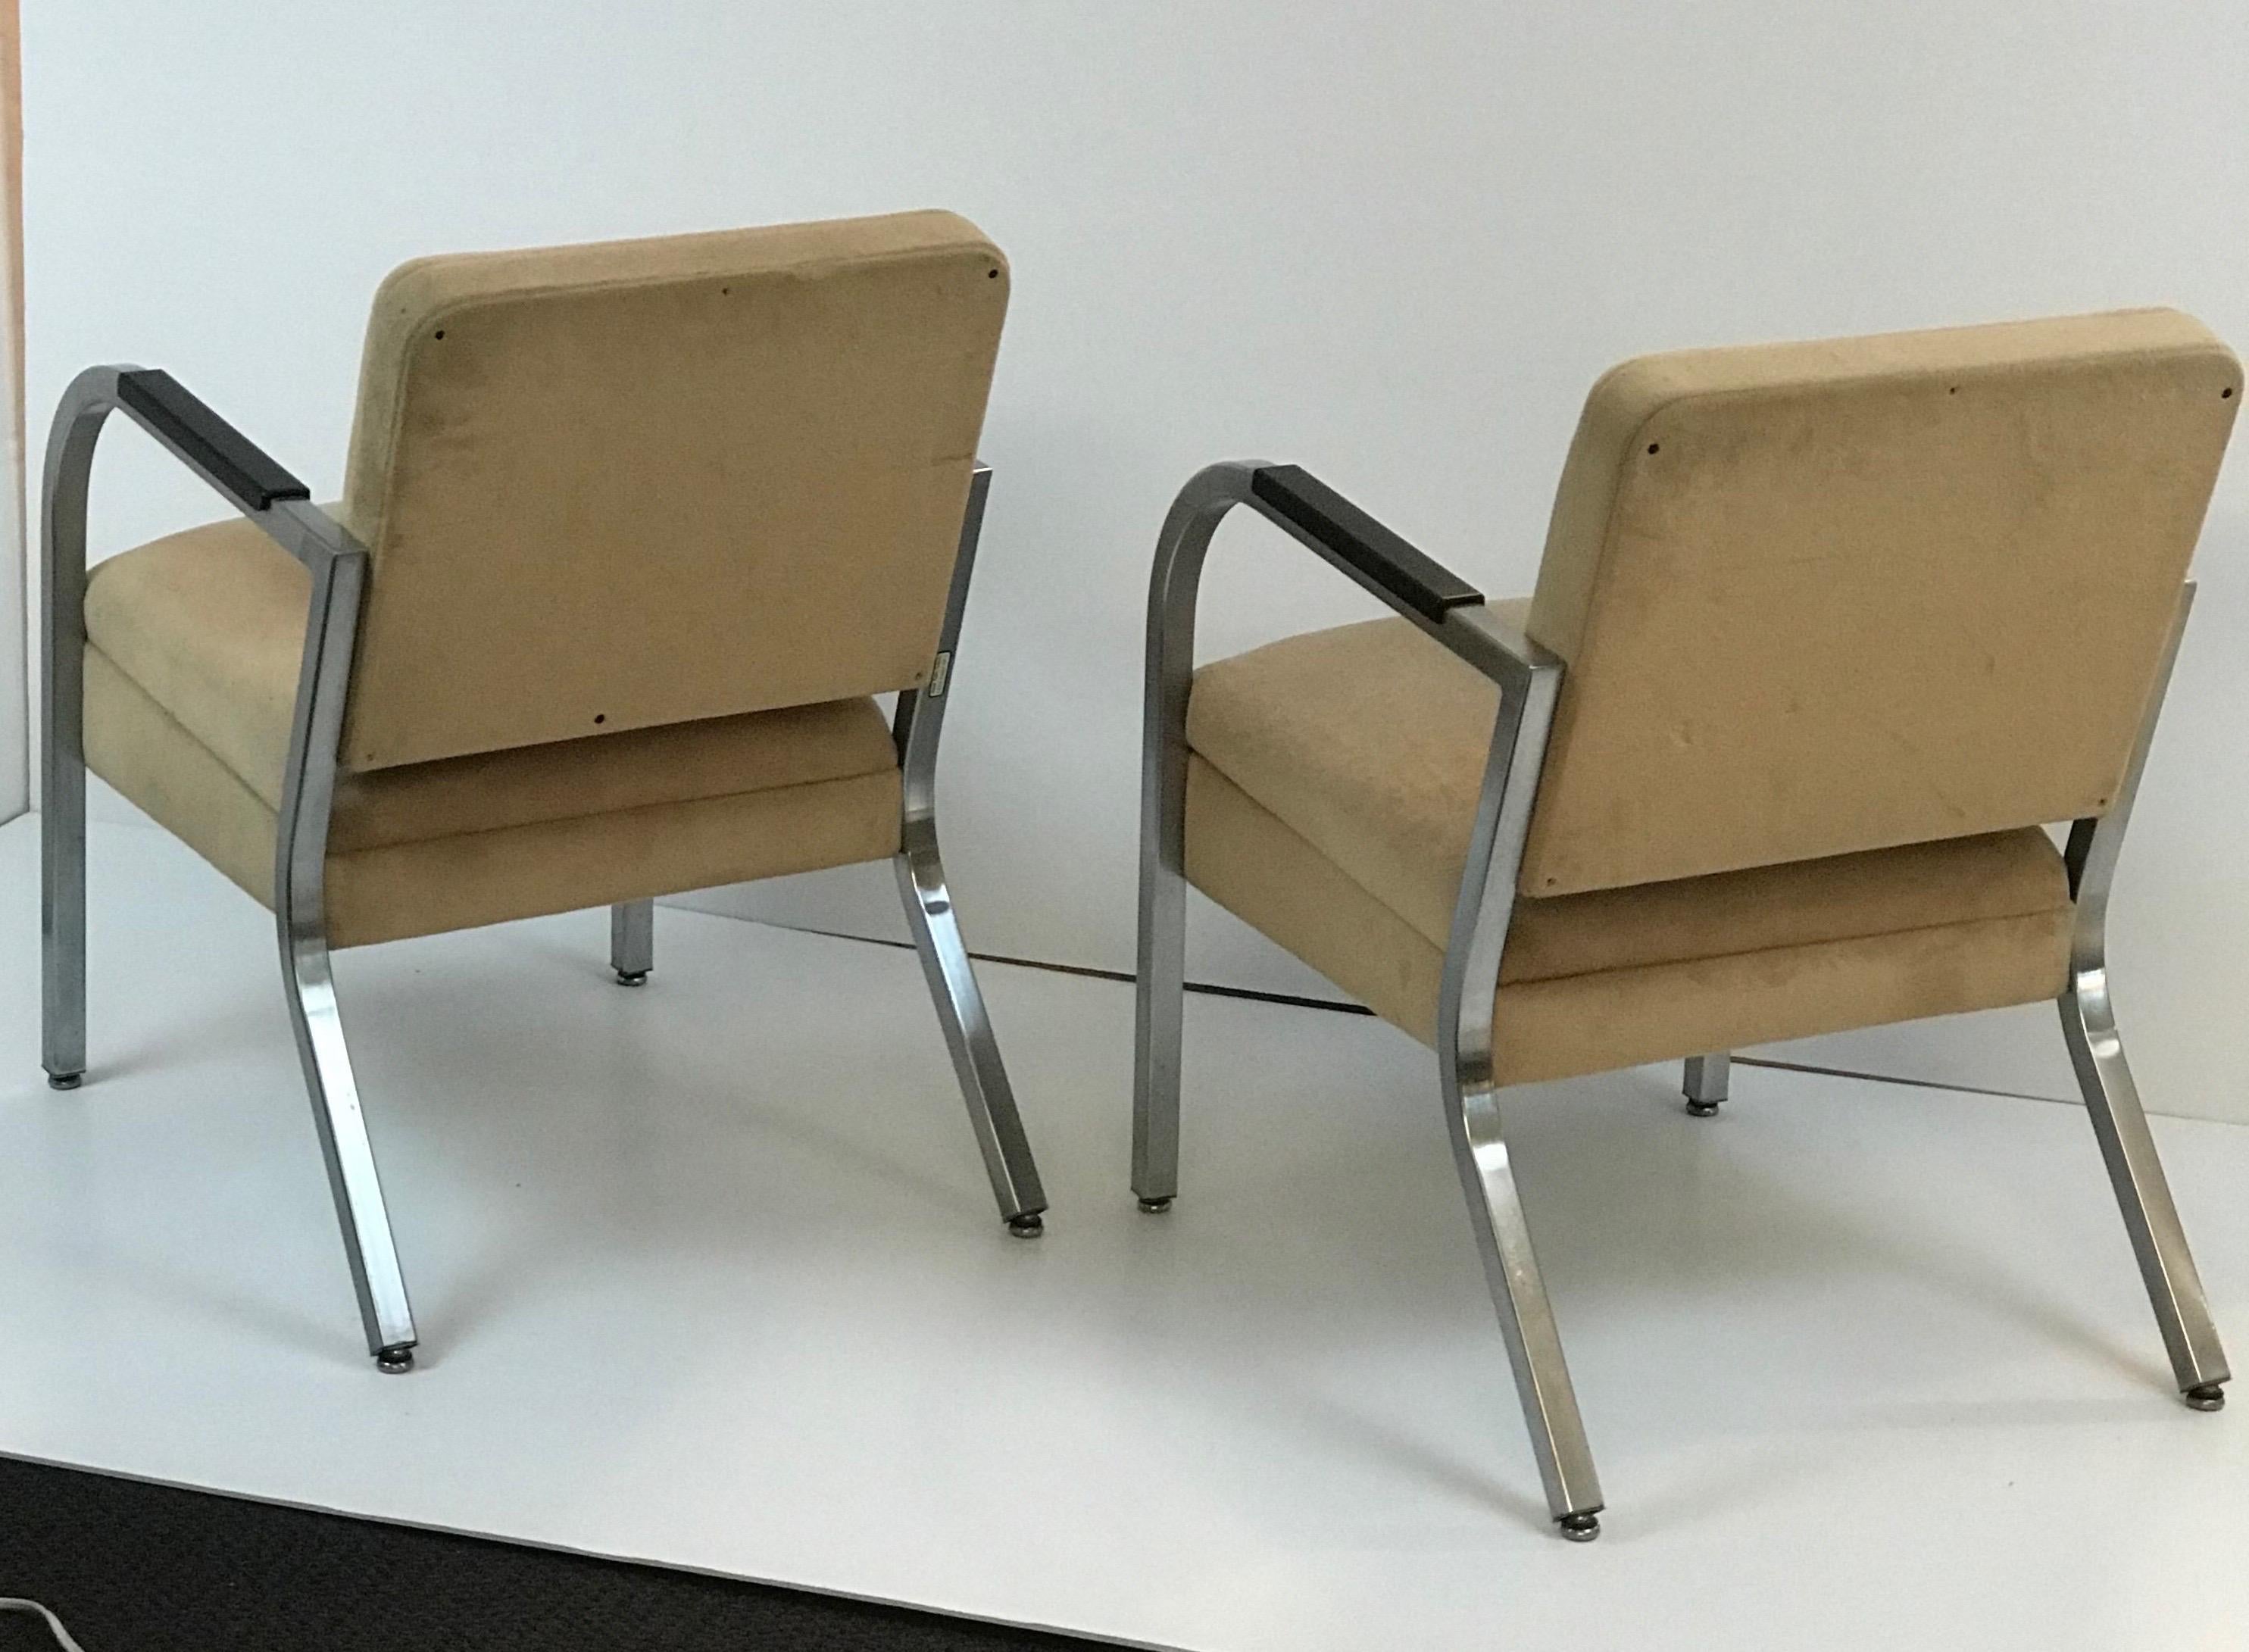 Mid-Century Modern A Pair of Petite Square Tubing 1960's Club Chairs IMO Shaw Walker or Goodform,  